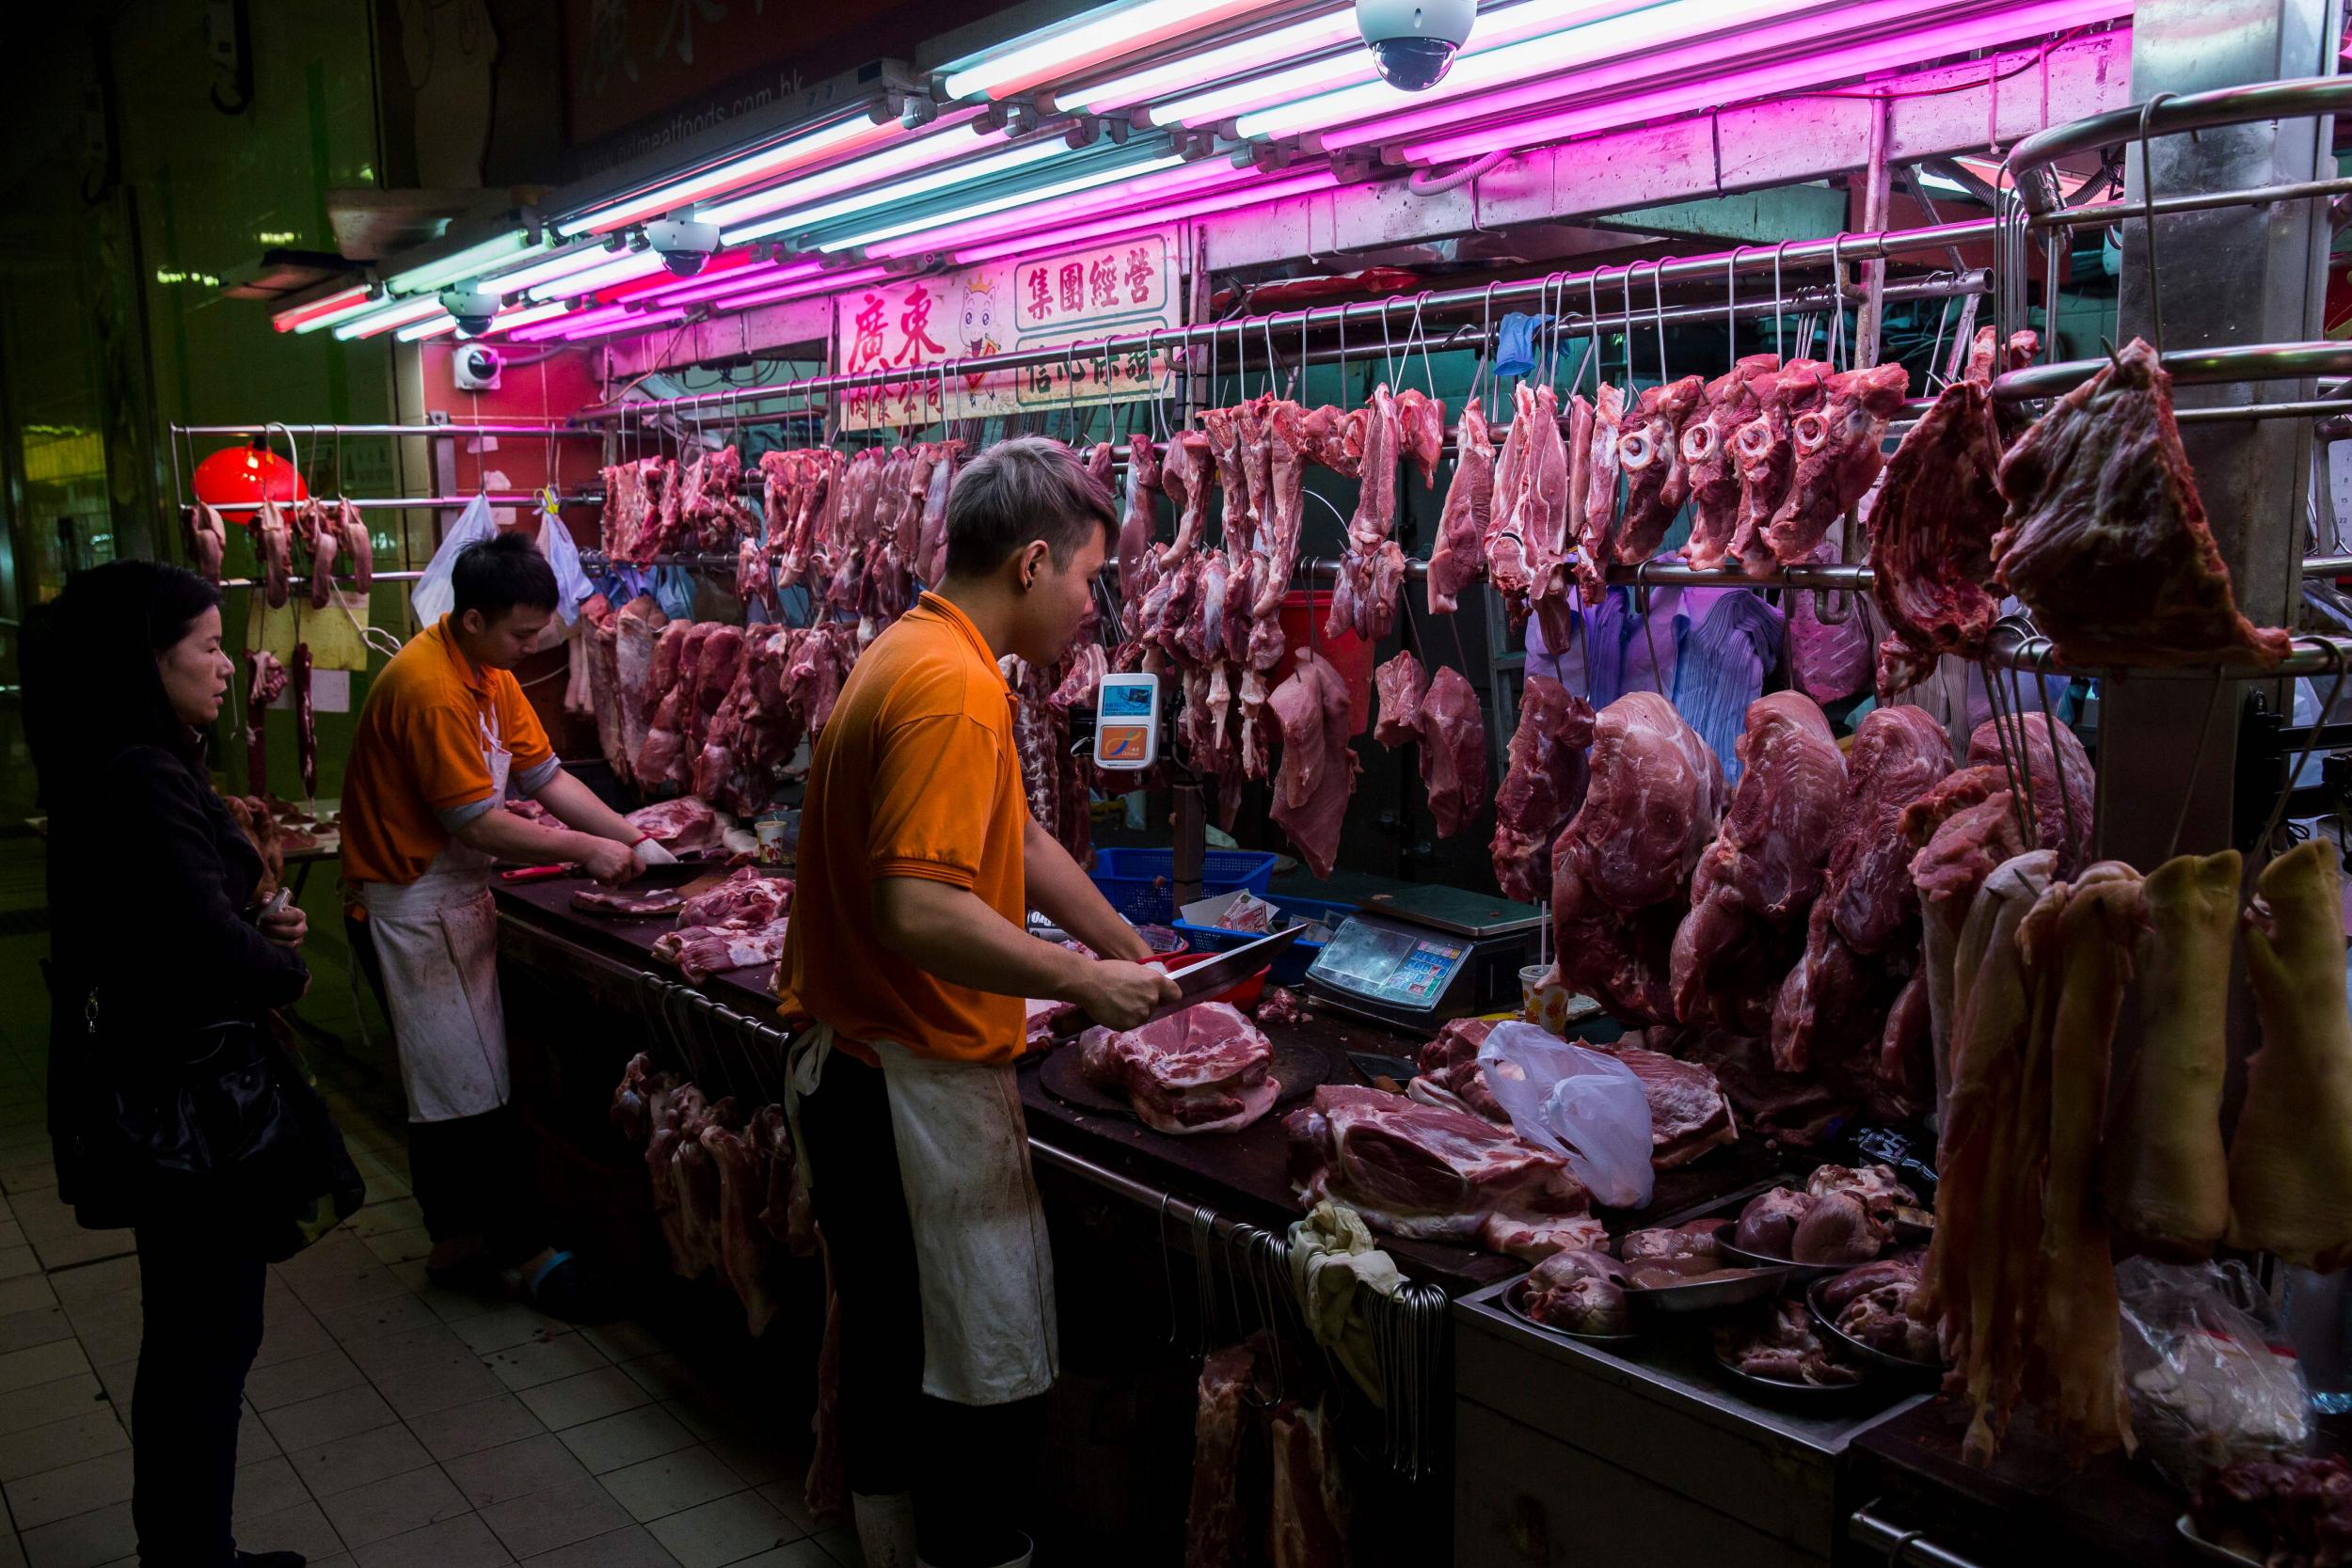 A stall worker cuts pork for a customer at the Wan Chai wet market in Hong Kong